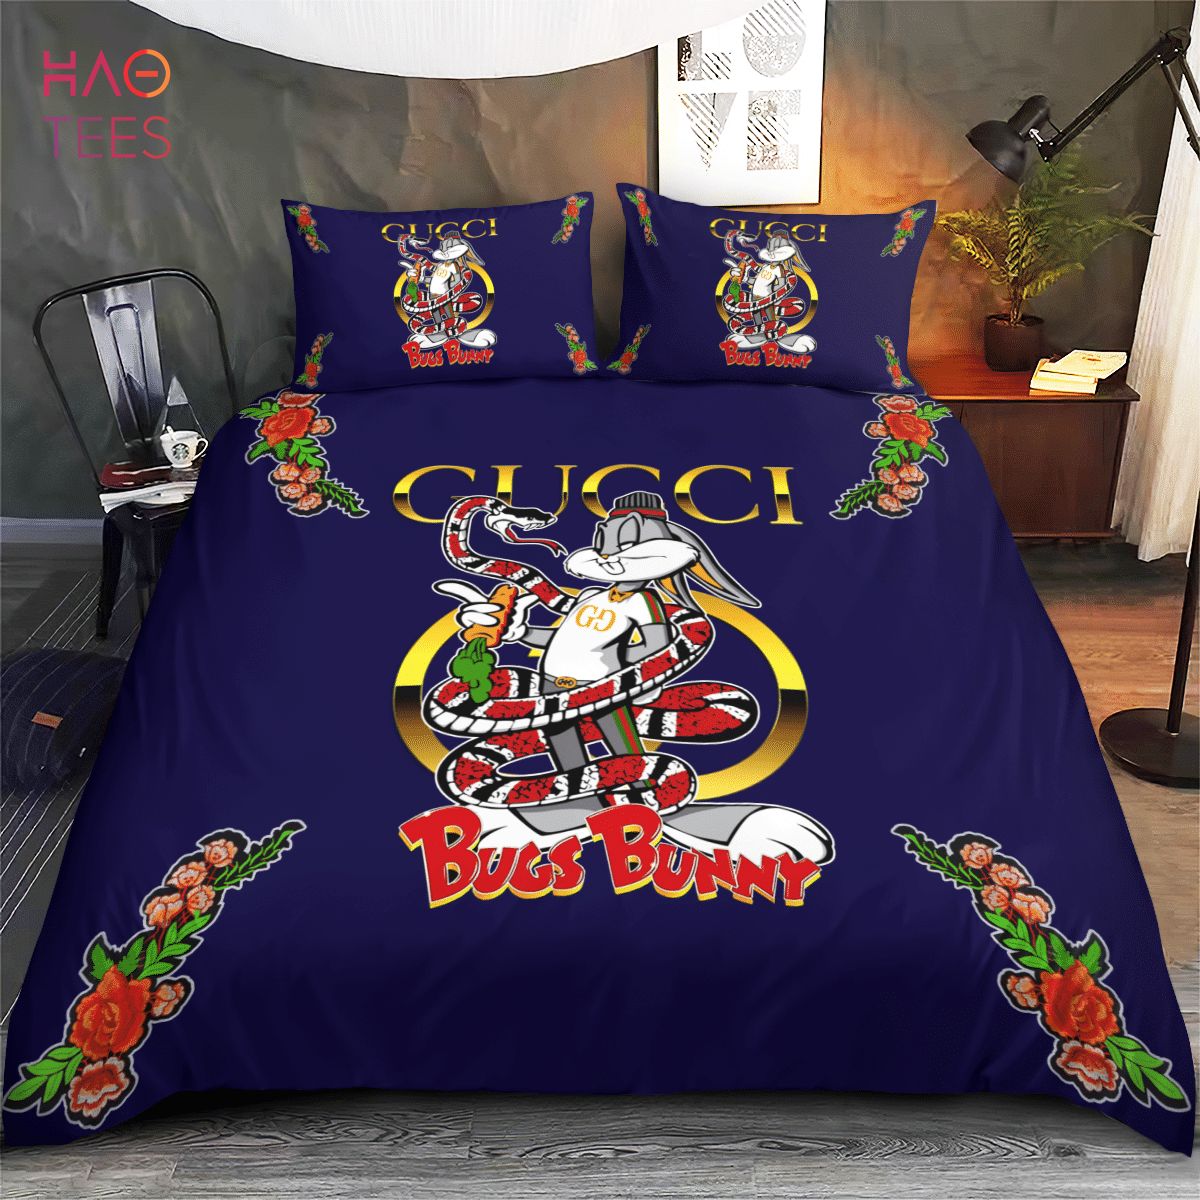 Gucci Bugs Bunny Limited Edition Bedding Set